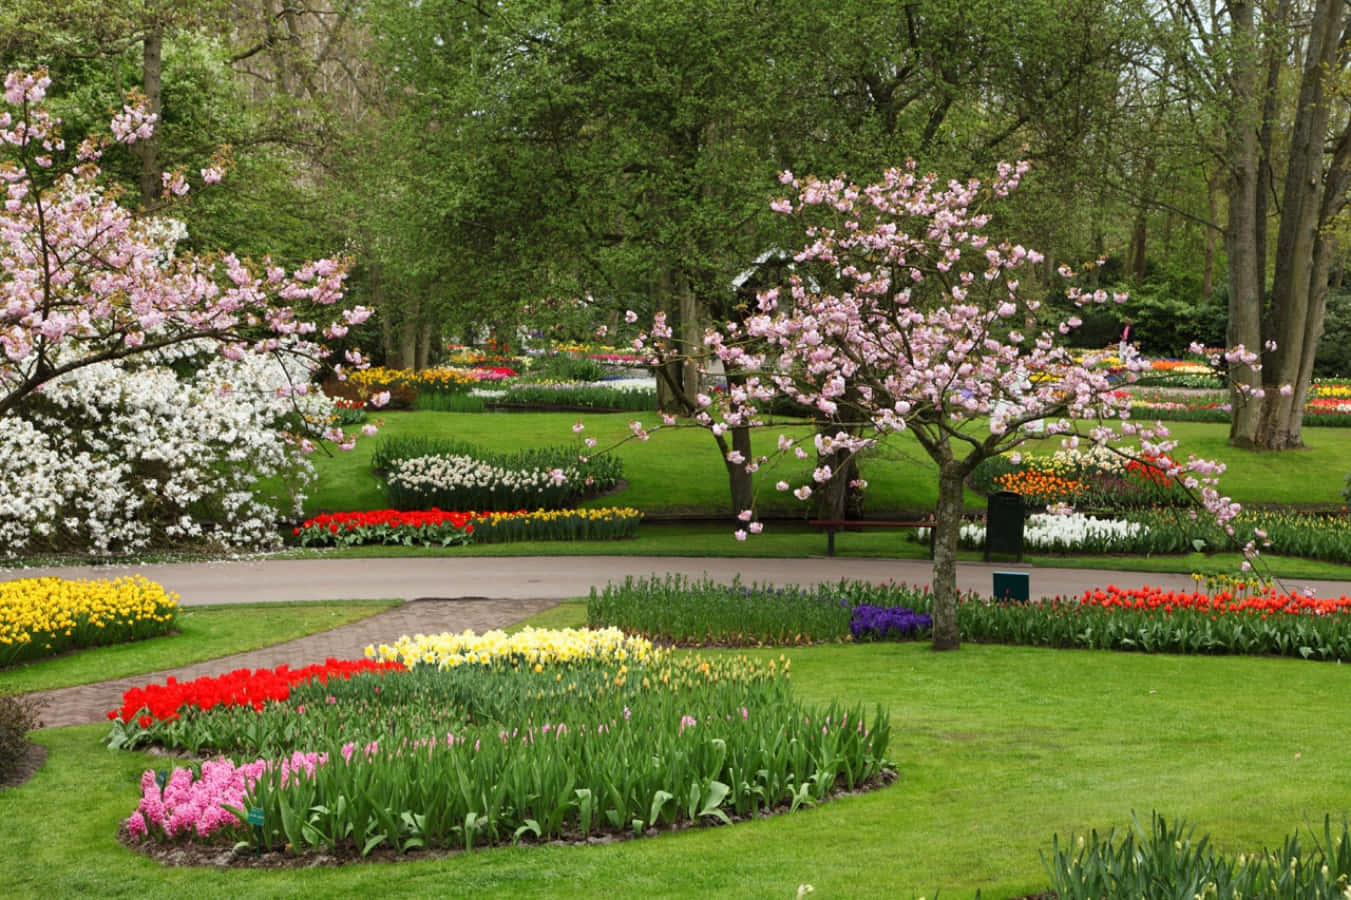 A Park With Many Colorful Flowers